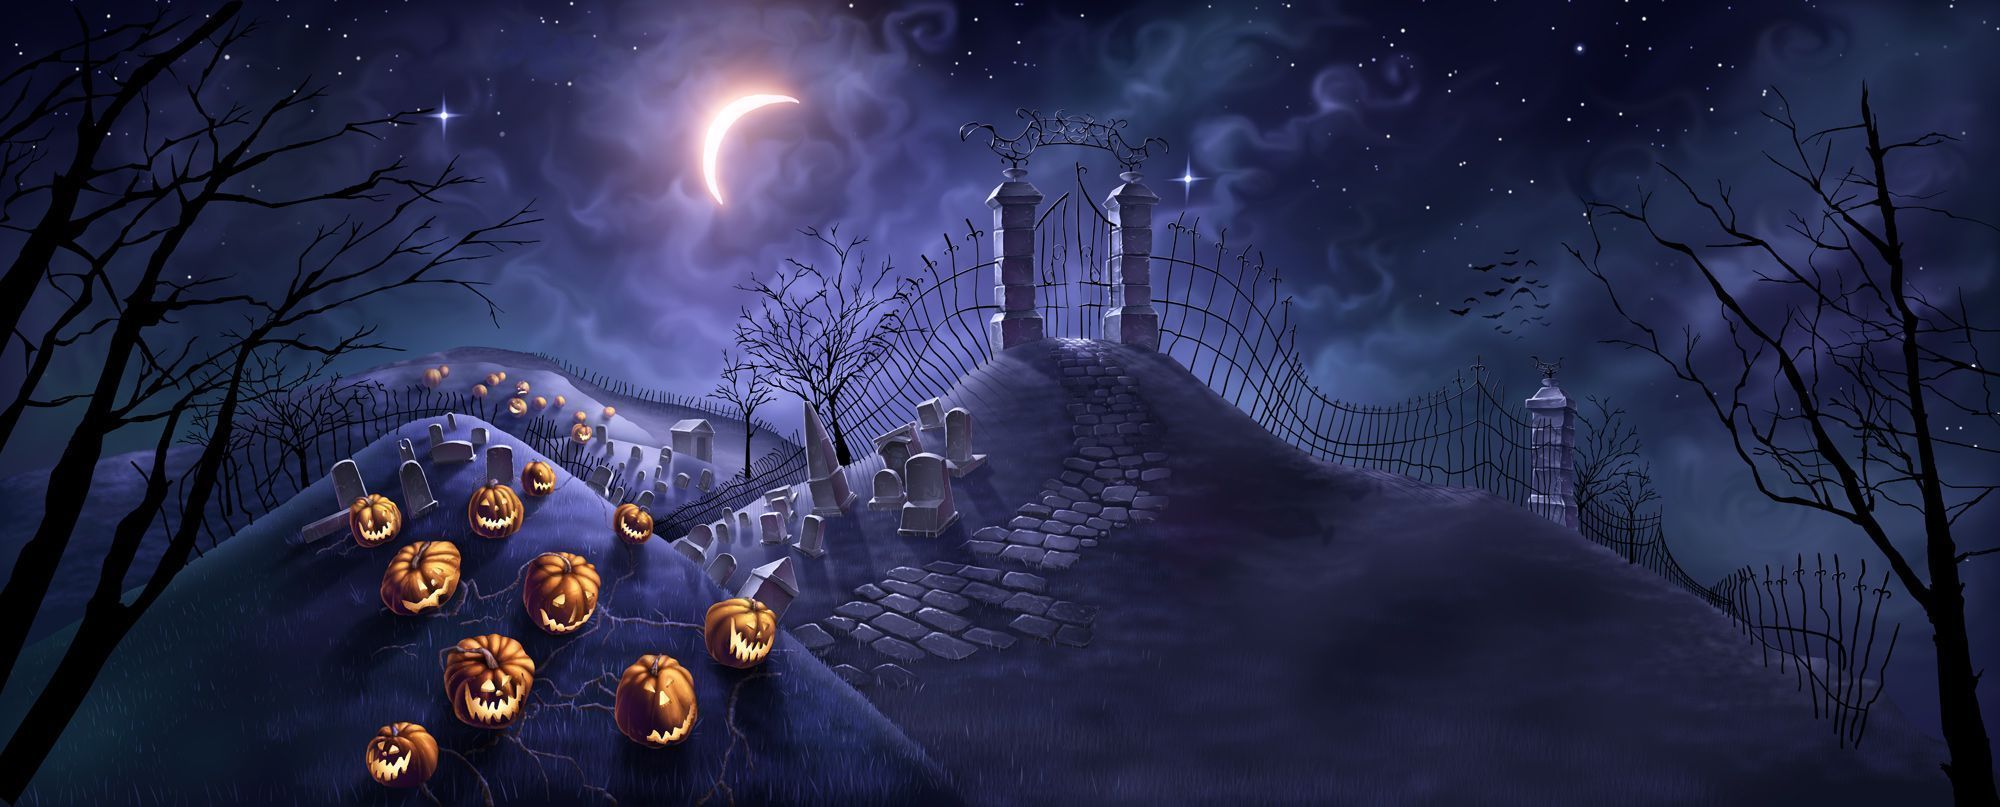 Free Halloween 2013 Backgrounds & Backgrounds